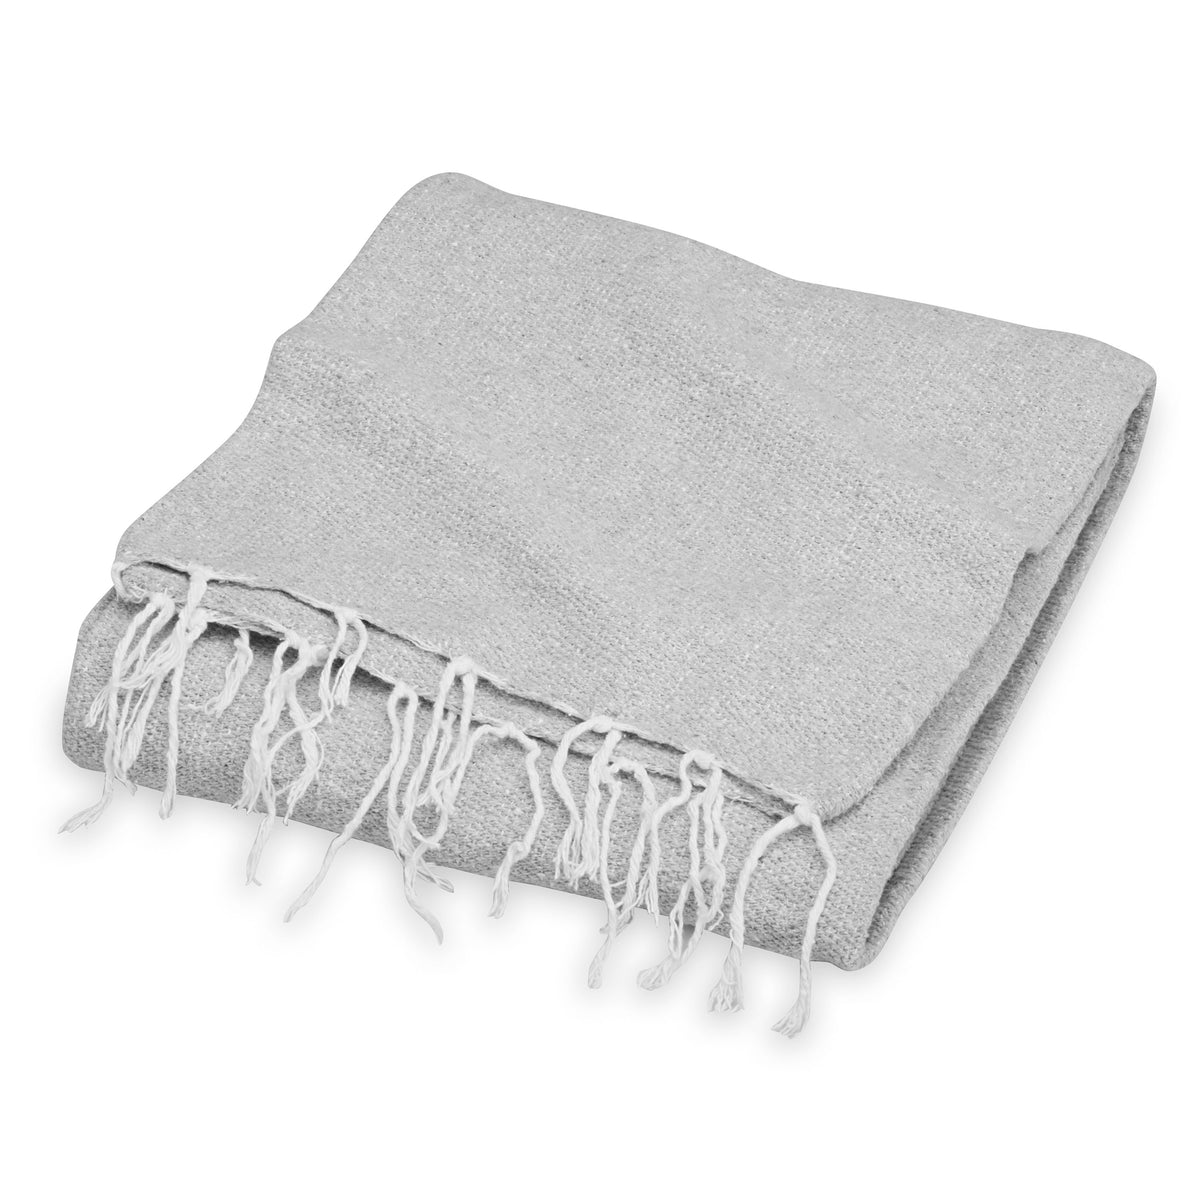 Traditional Mexican Woven Blanket Gray folded angle